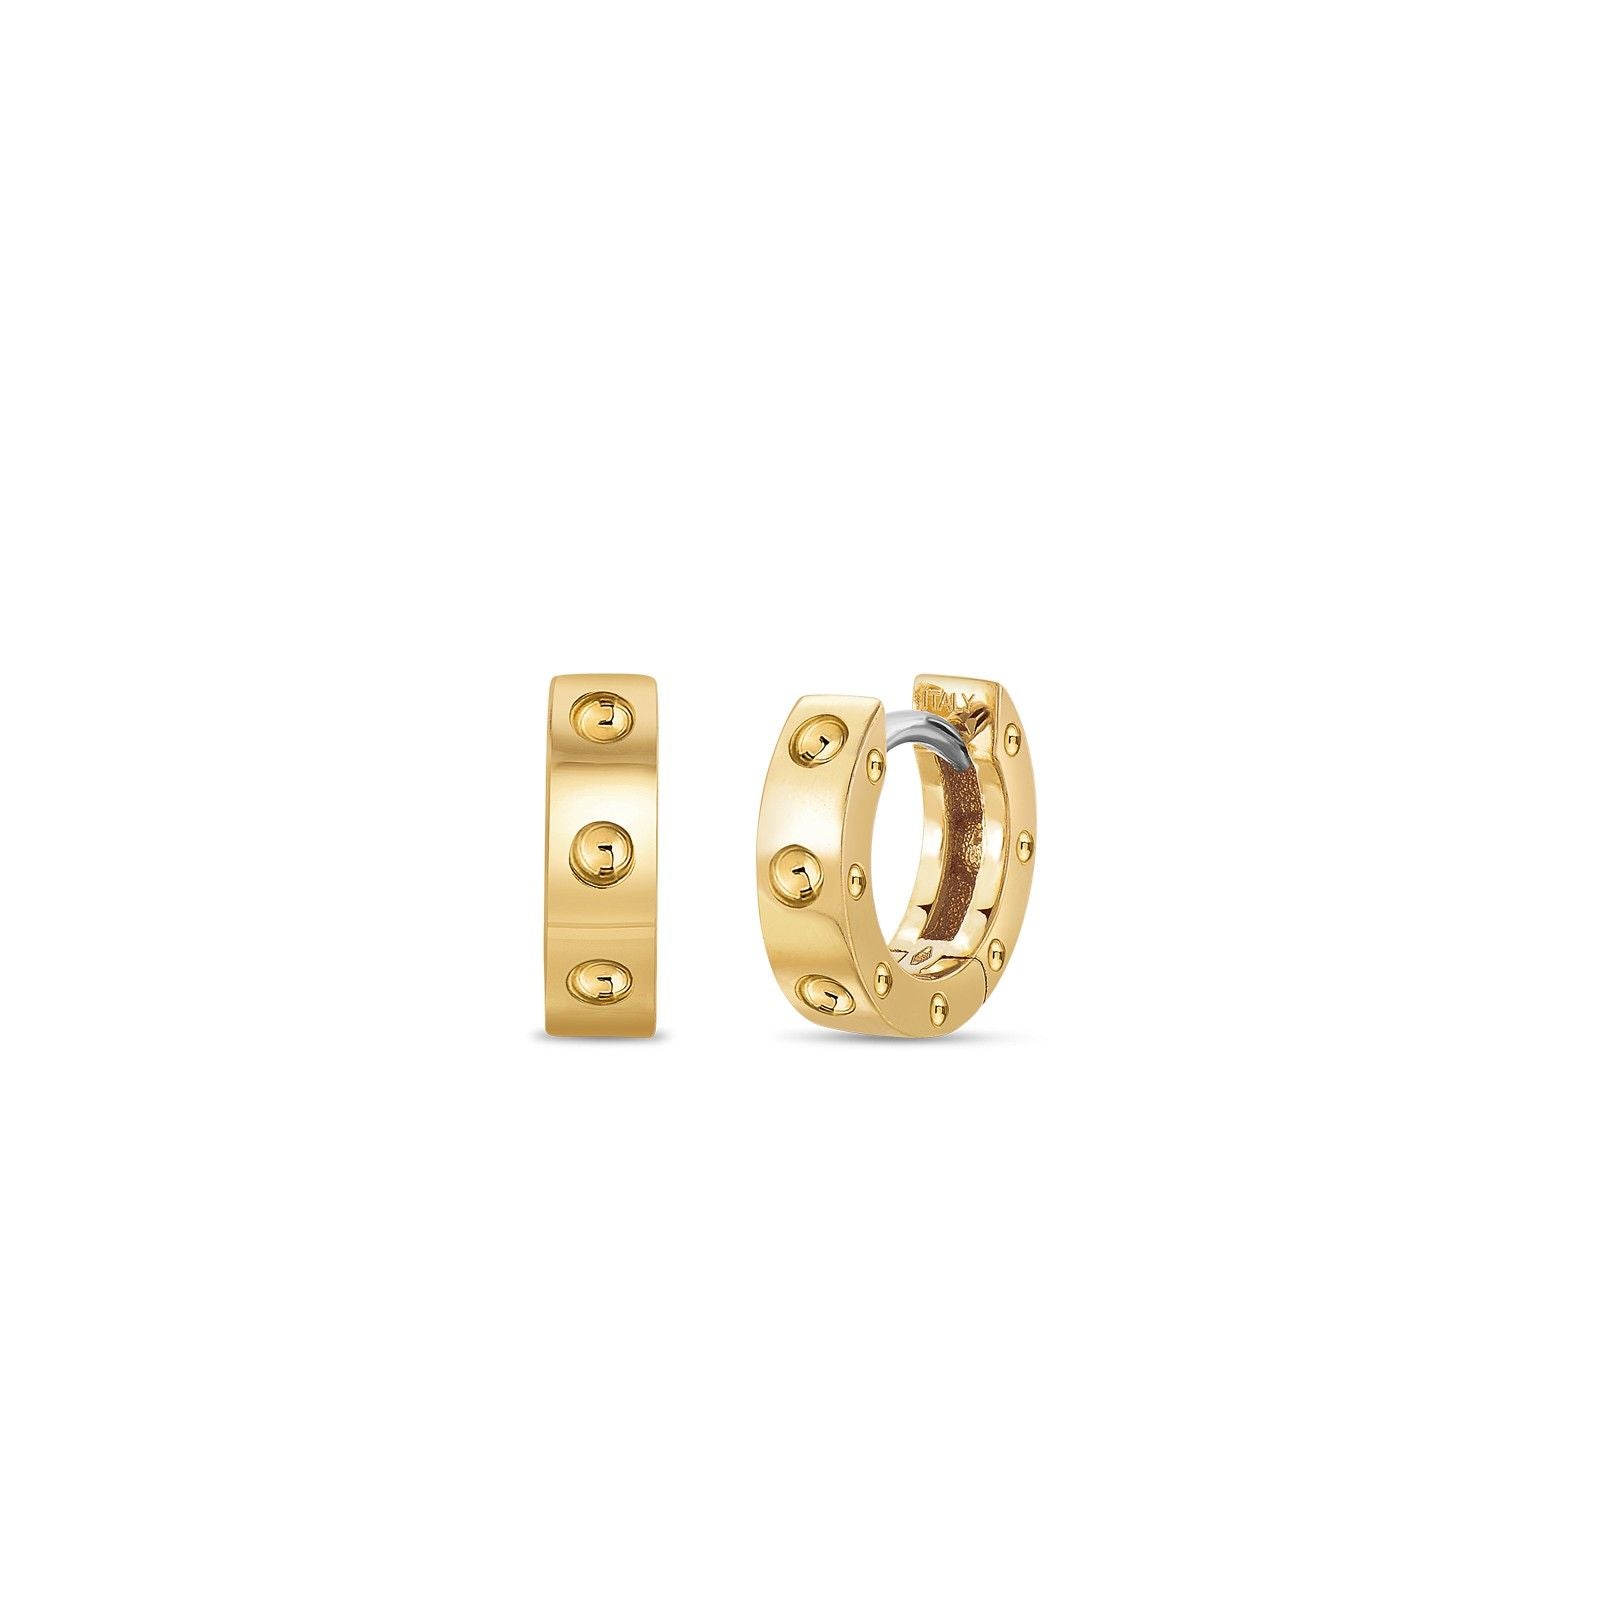 Pois Moi Yellow Gold Earrings - Dracakis Jewellers